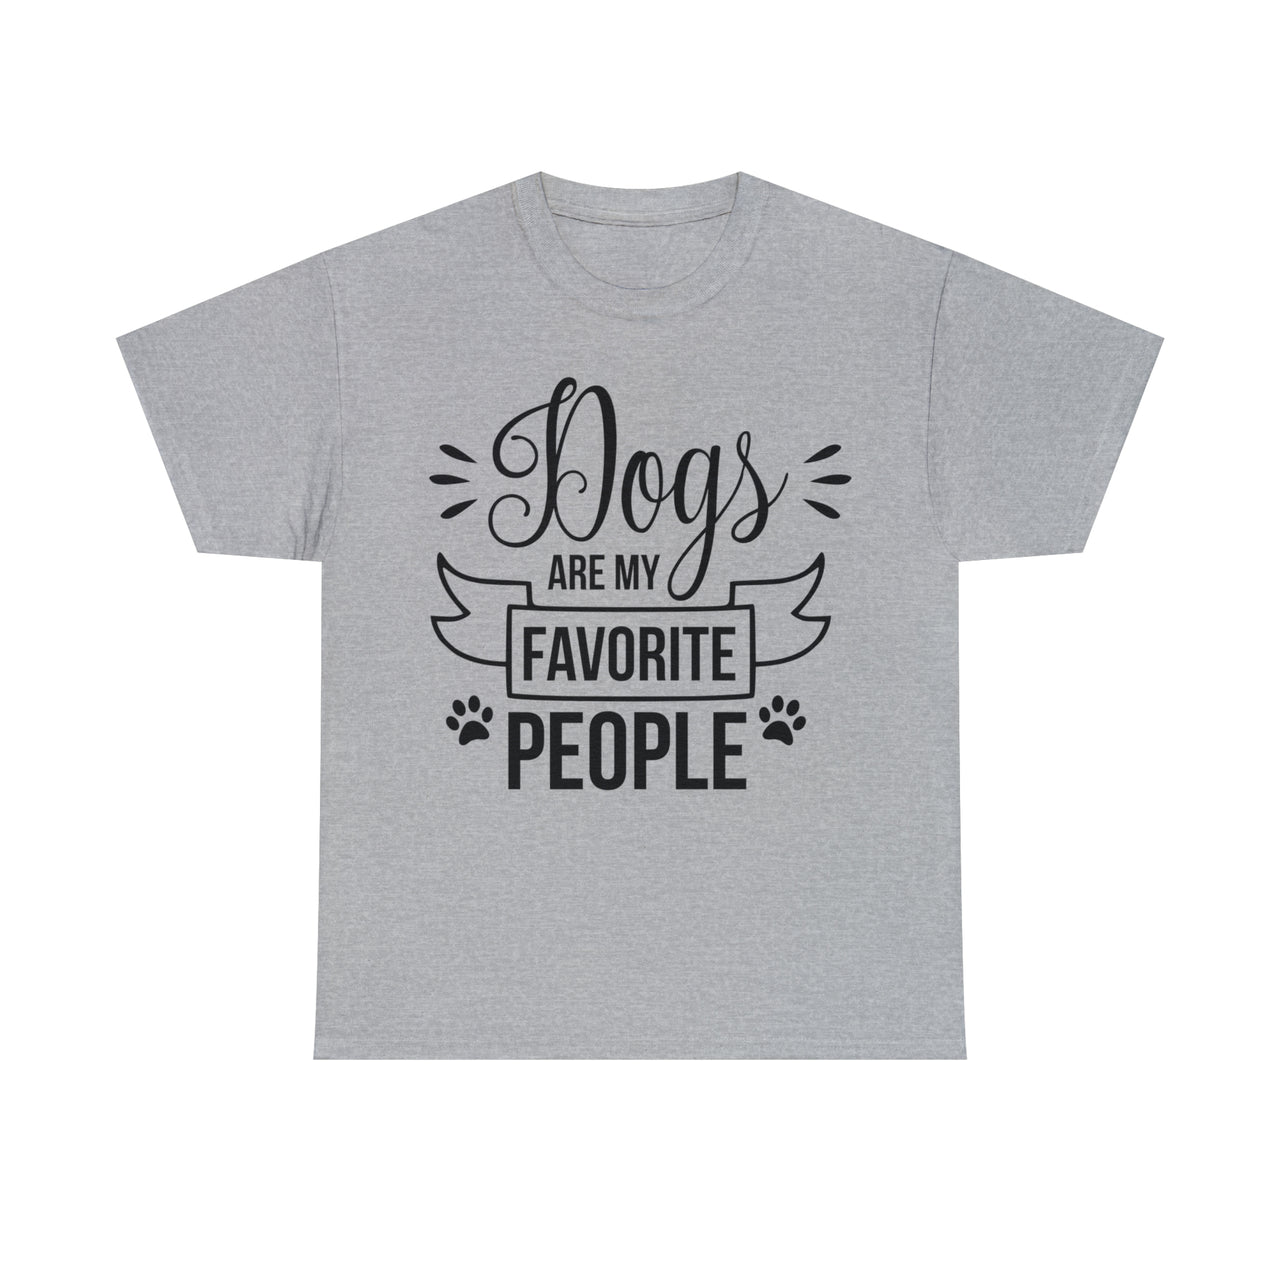 Dogs Are My Favorite People 🐕❤️ Unisex T-Shirt